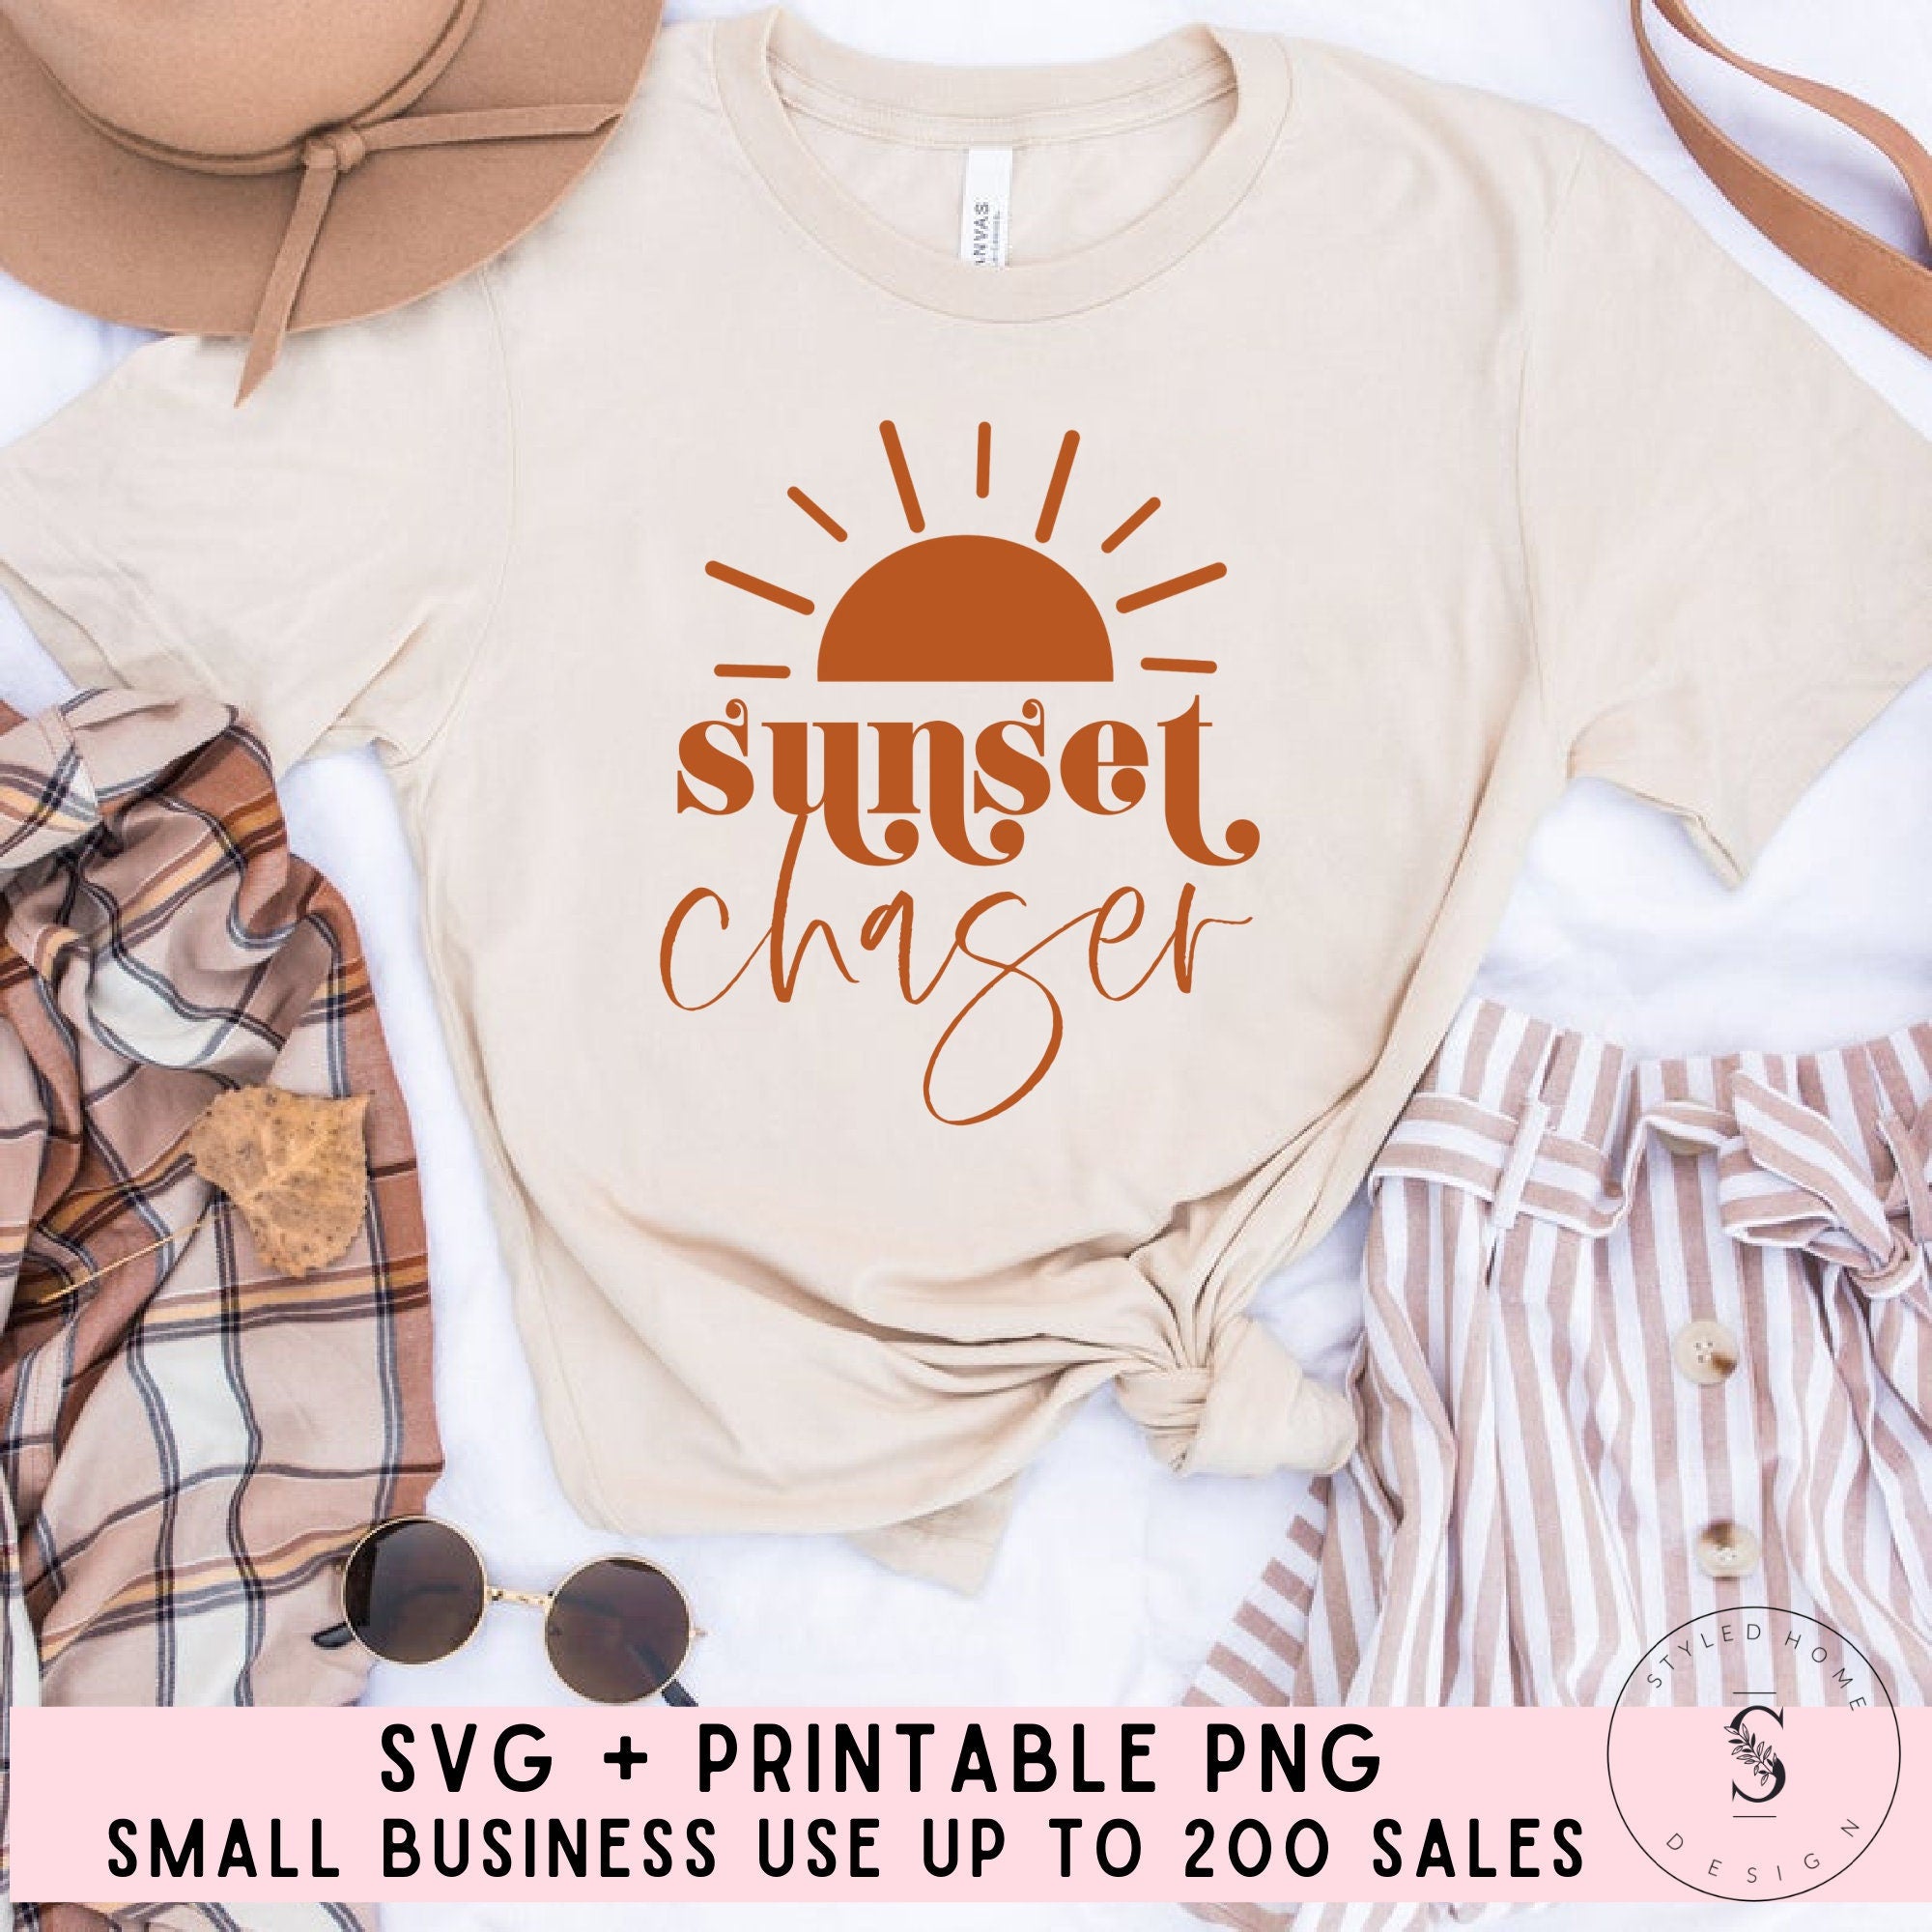 Sunset Chaser, Take it Easy, Sunny Days Ahead, Summer Boho Vintage Spring, Retro SVG Cut File DXF Printable PNG Silhouette CricutSublimation